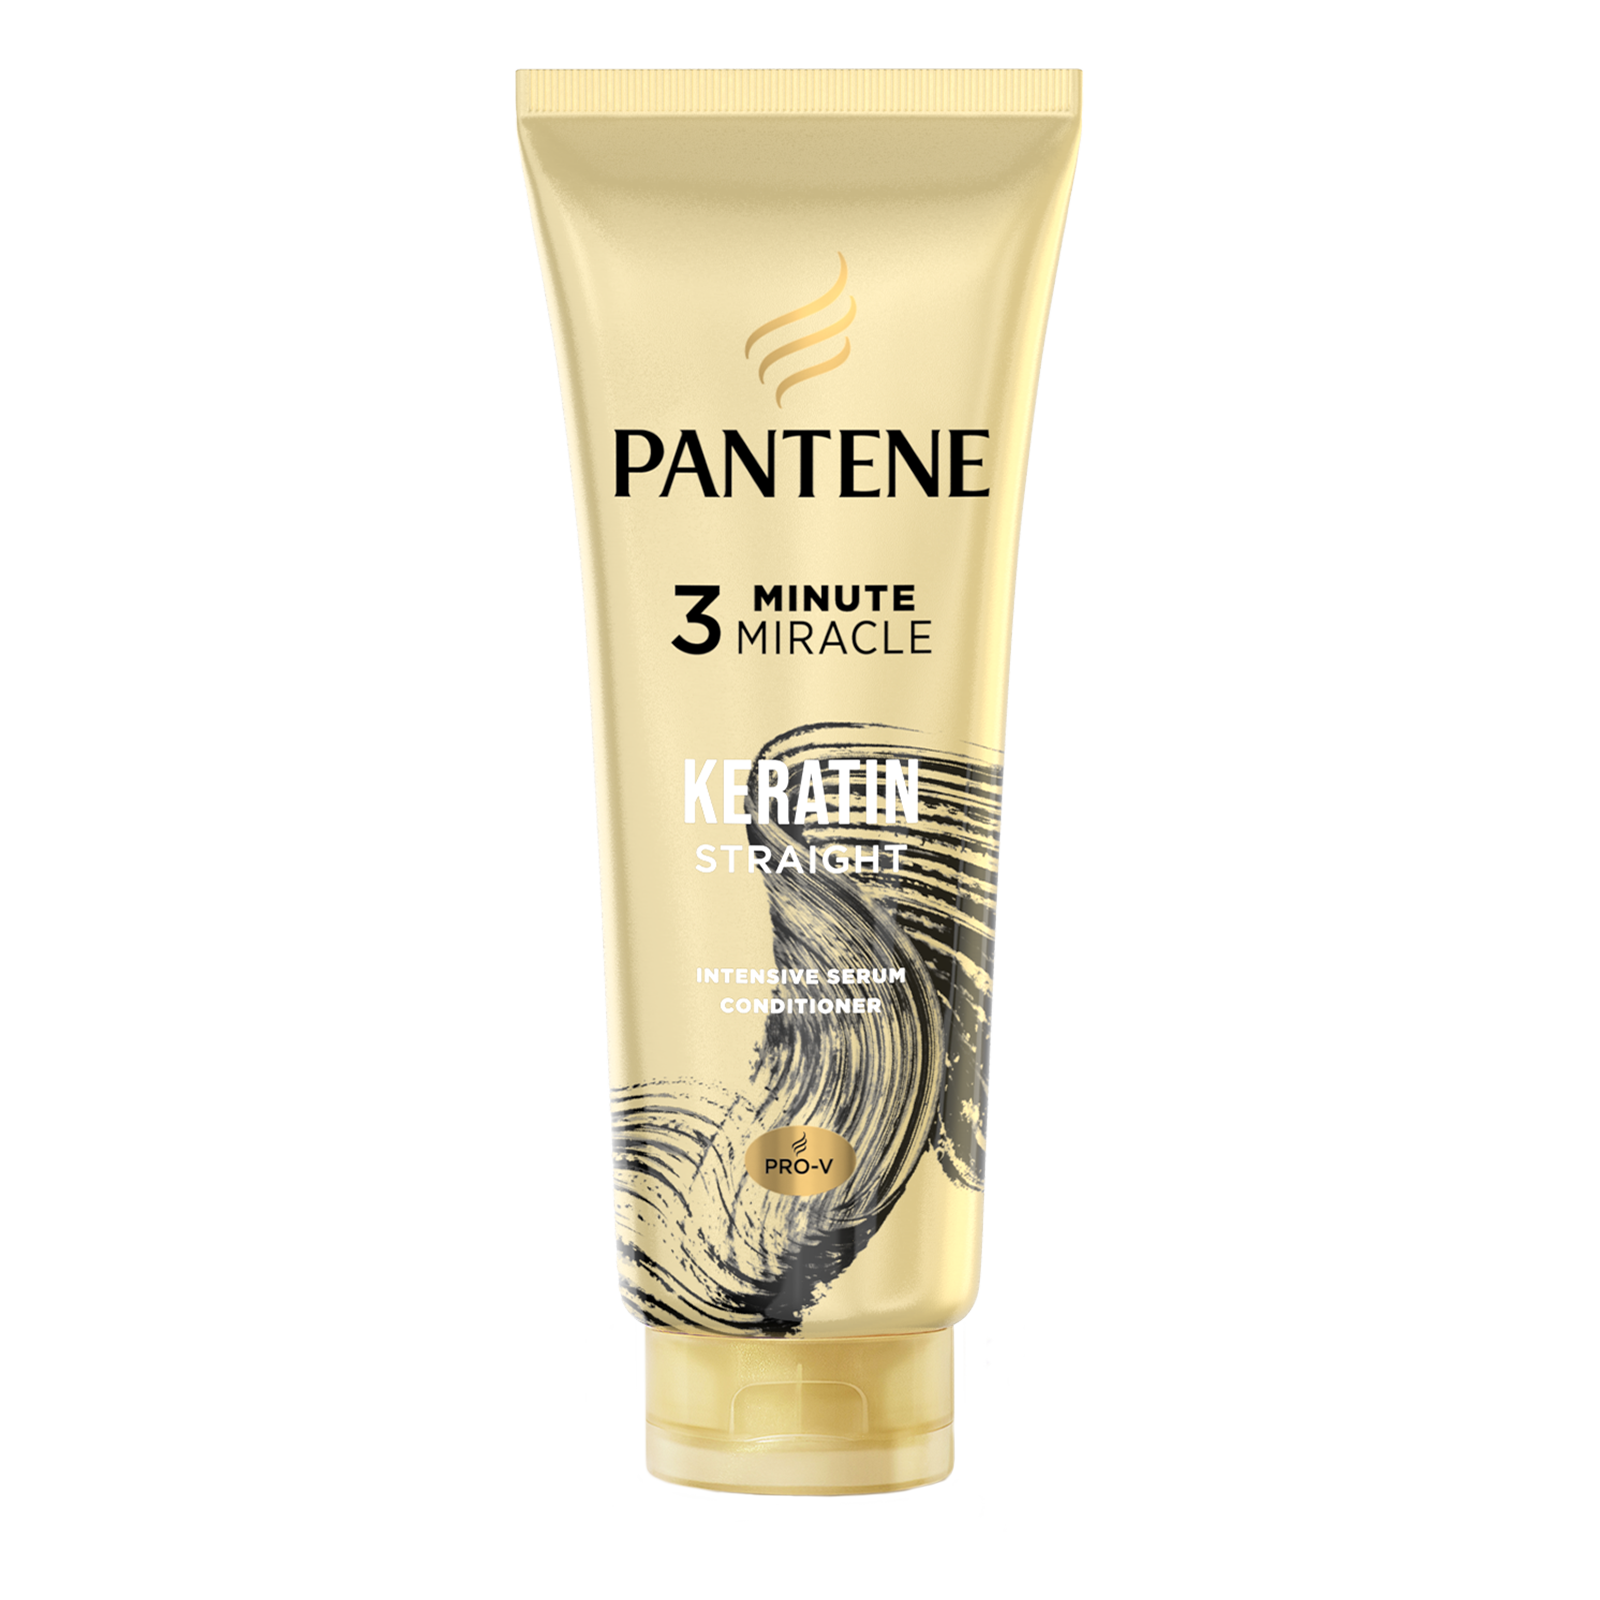 3 Minute Miracle Keratin Straight Conditioner | Pantene Philippines